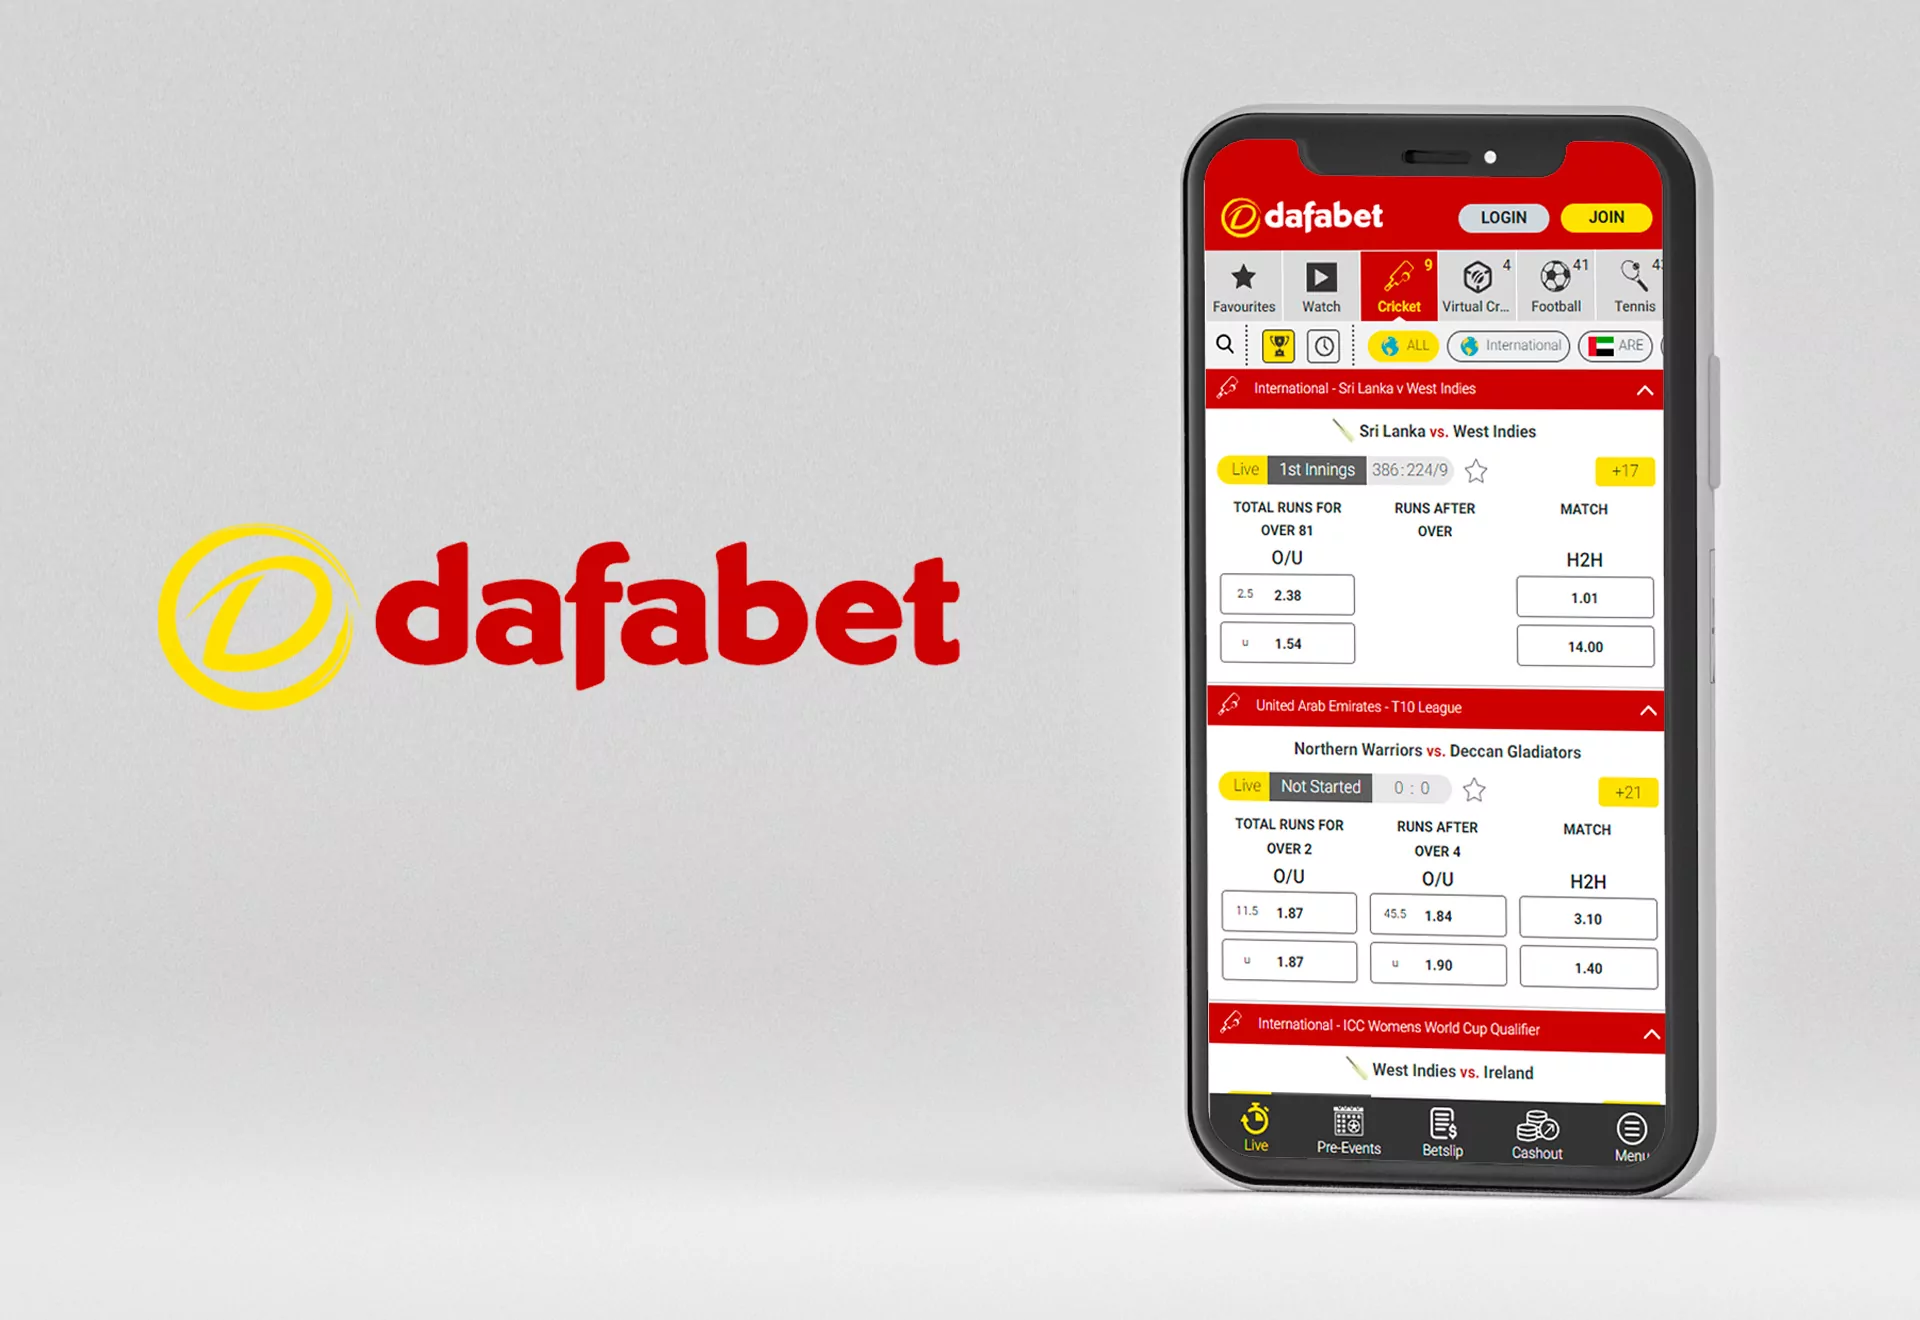 The Dafabet app is available for Android and iOS devices.